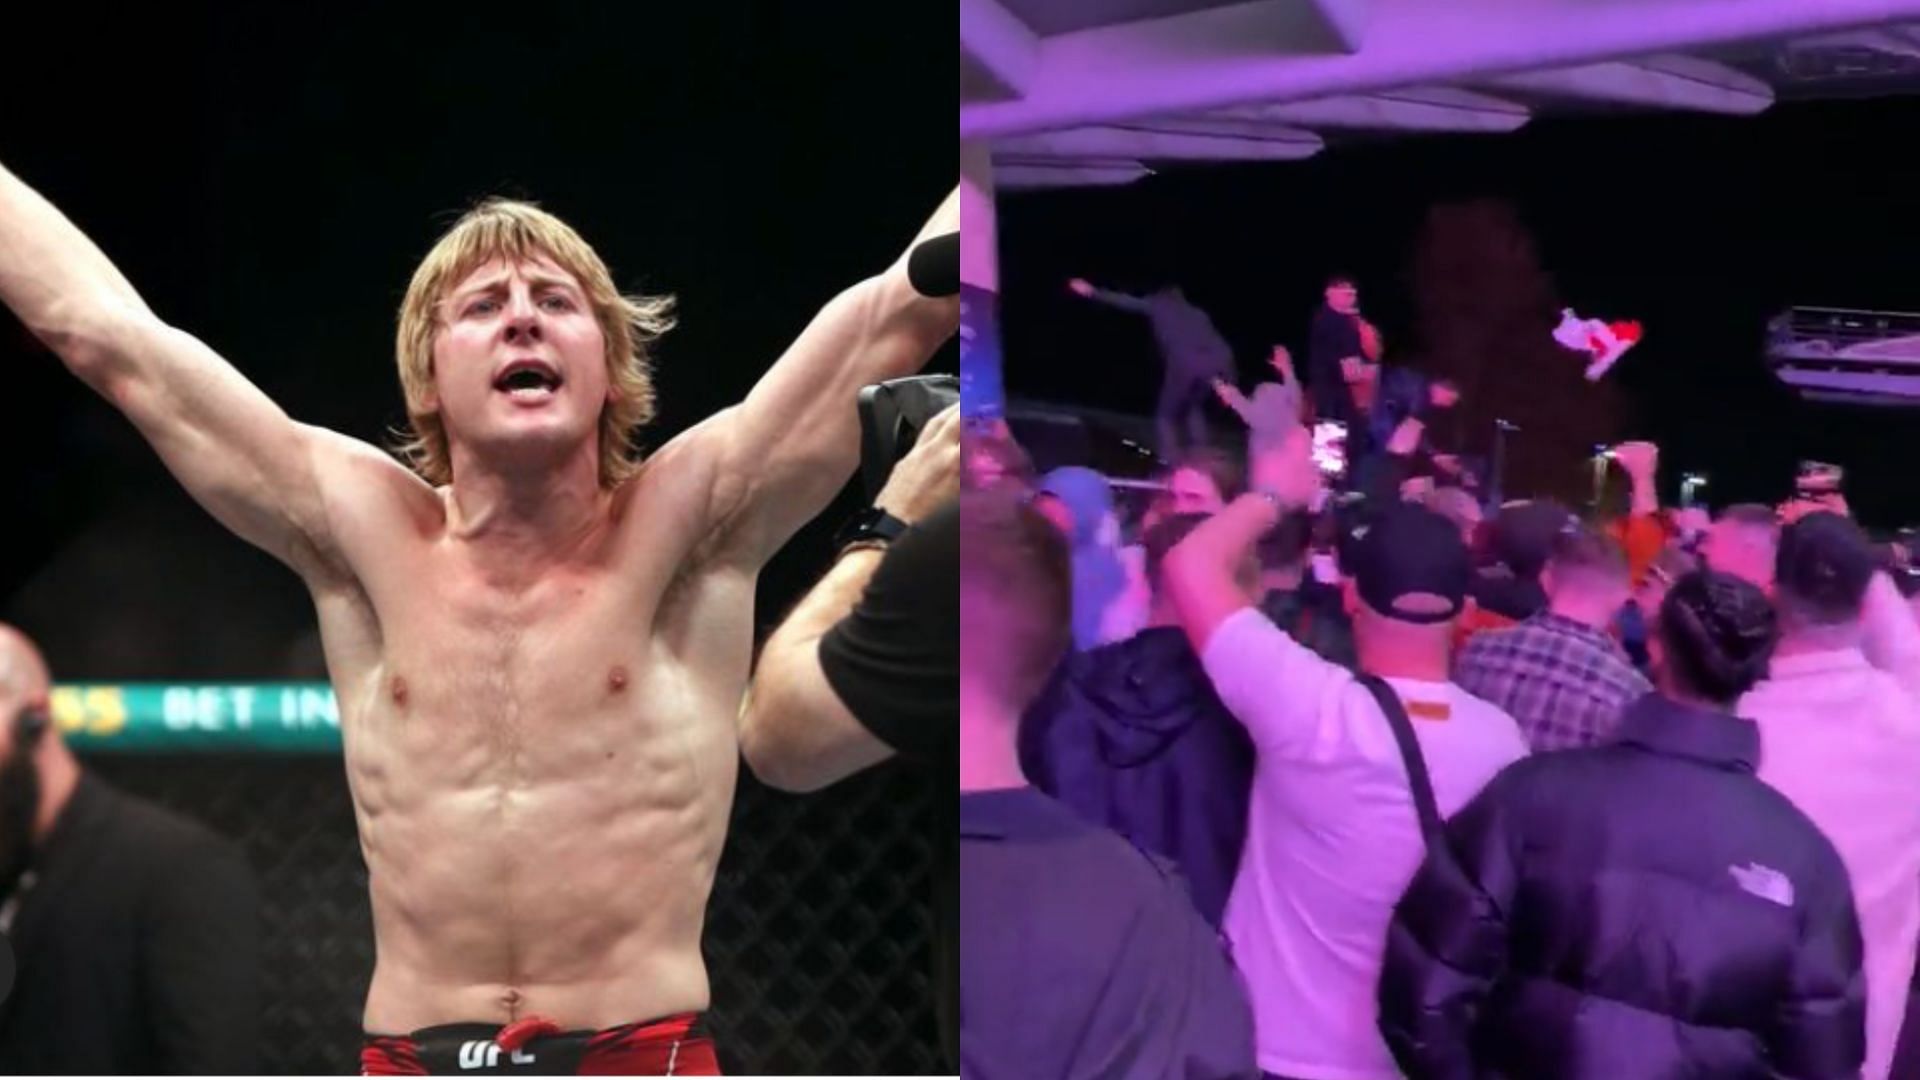 Paddy Pimblett (left) [Images Courtesy: @theufcbaddy on Instagram and @theufcbaddy on Twitter]